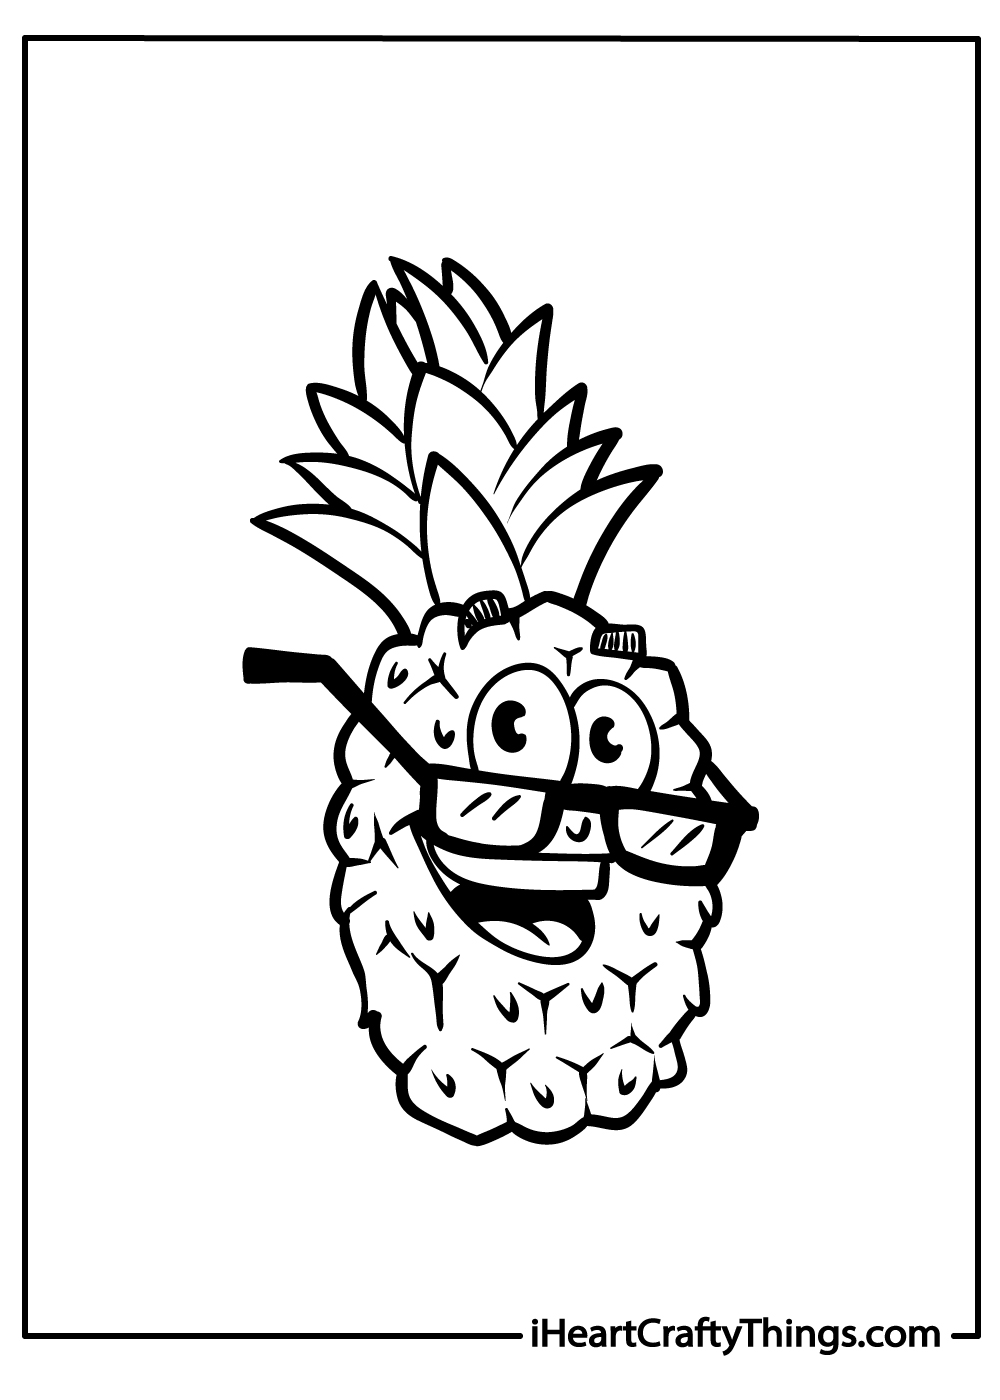 pineapple coloring pages free download